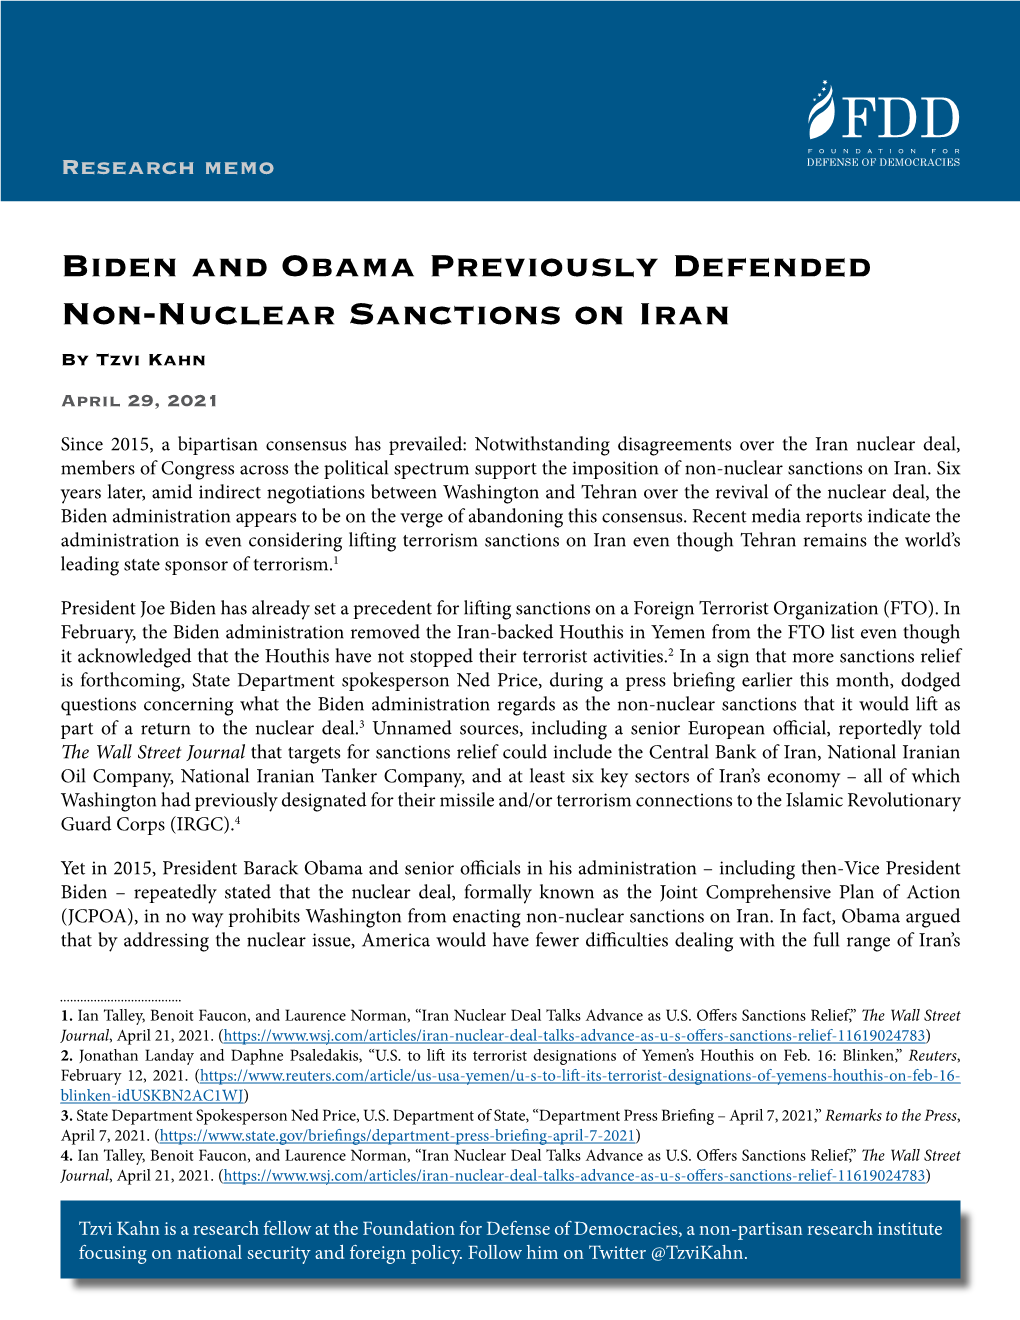 Biden and Obama Previously Defended Non-Nuclear Sanctions on Iran by Tzvi Kahn April 29, 2021